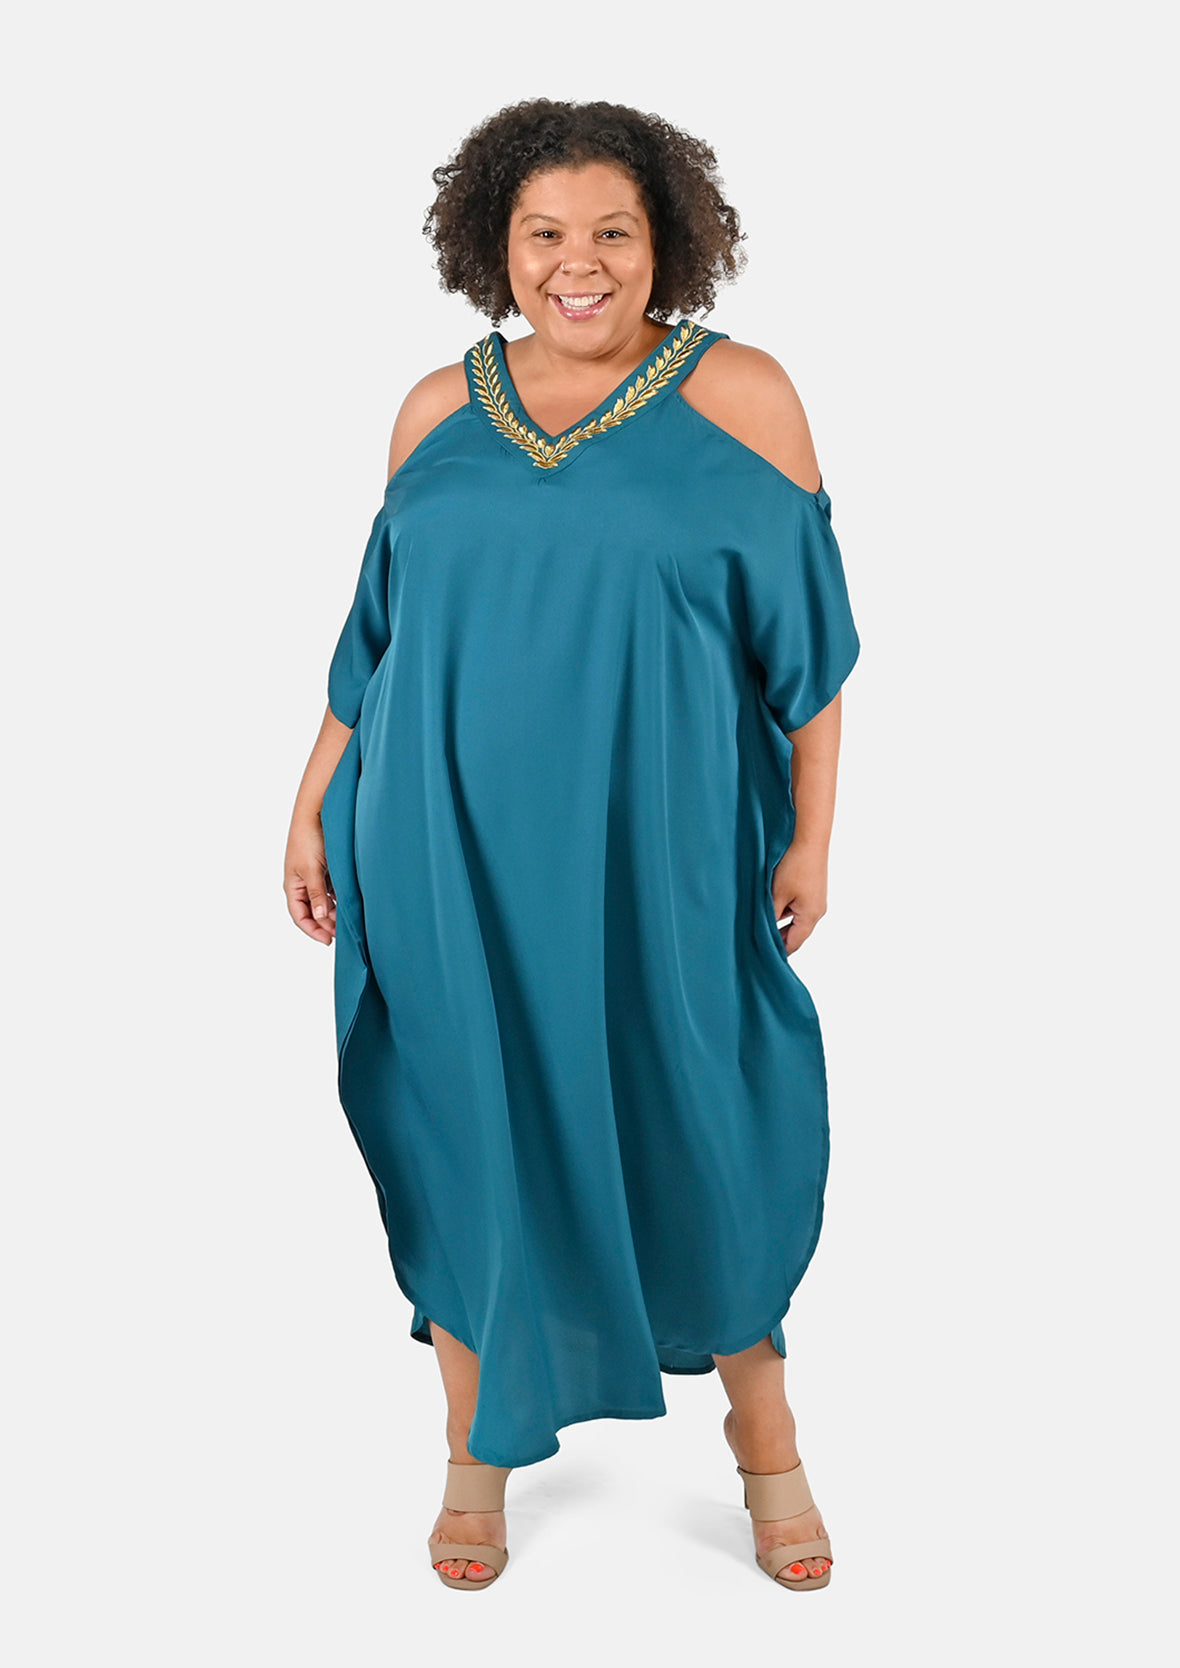 lady wearing embroidered v-neck long teal blue kaftan #color_Teal Blue with Embroidery